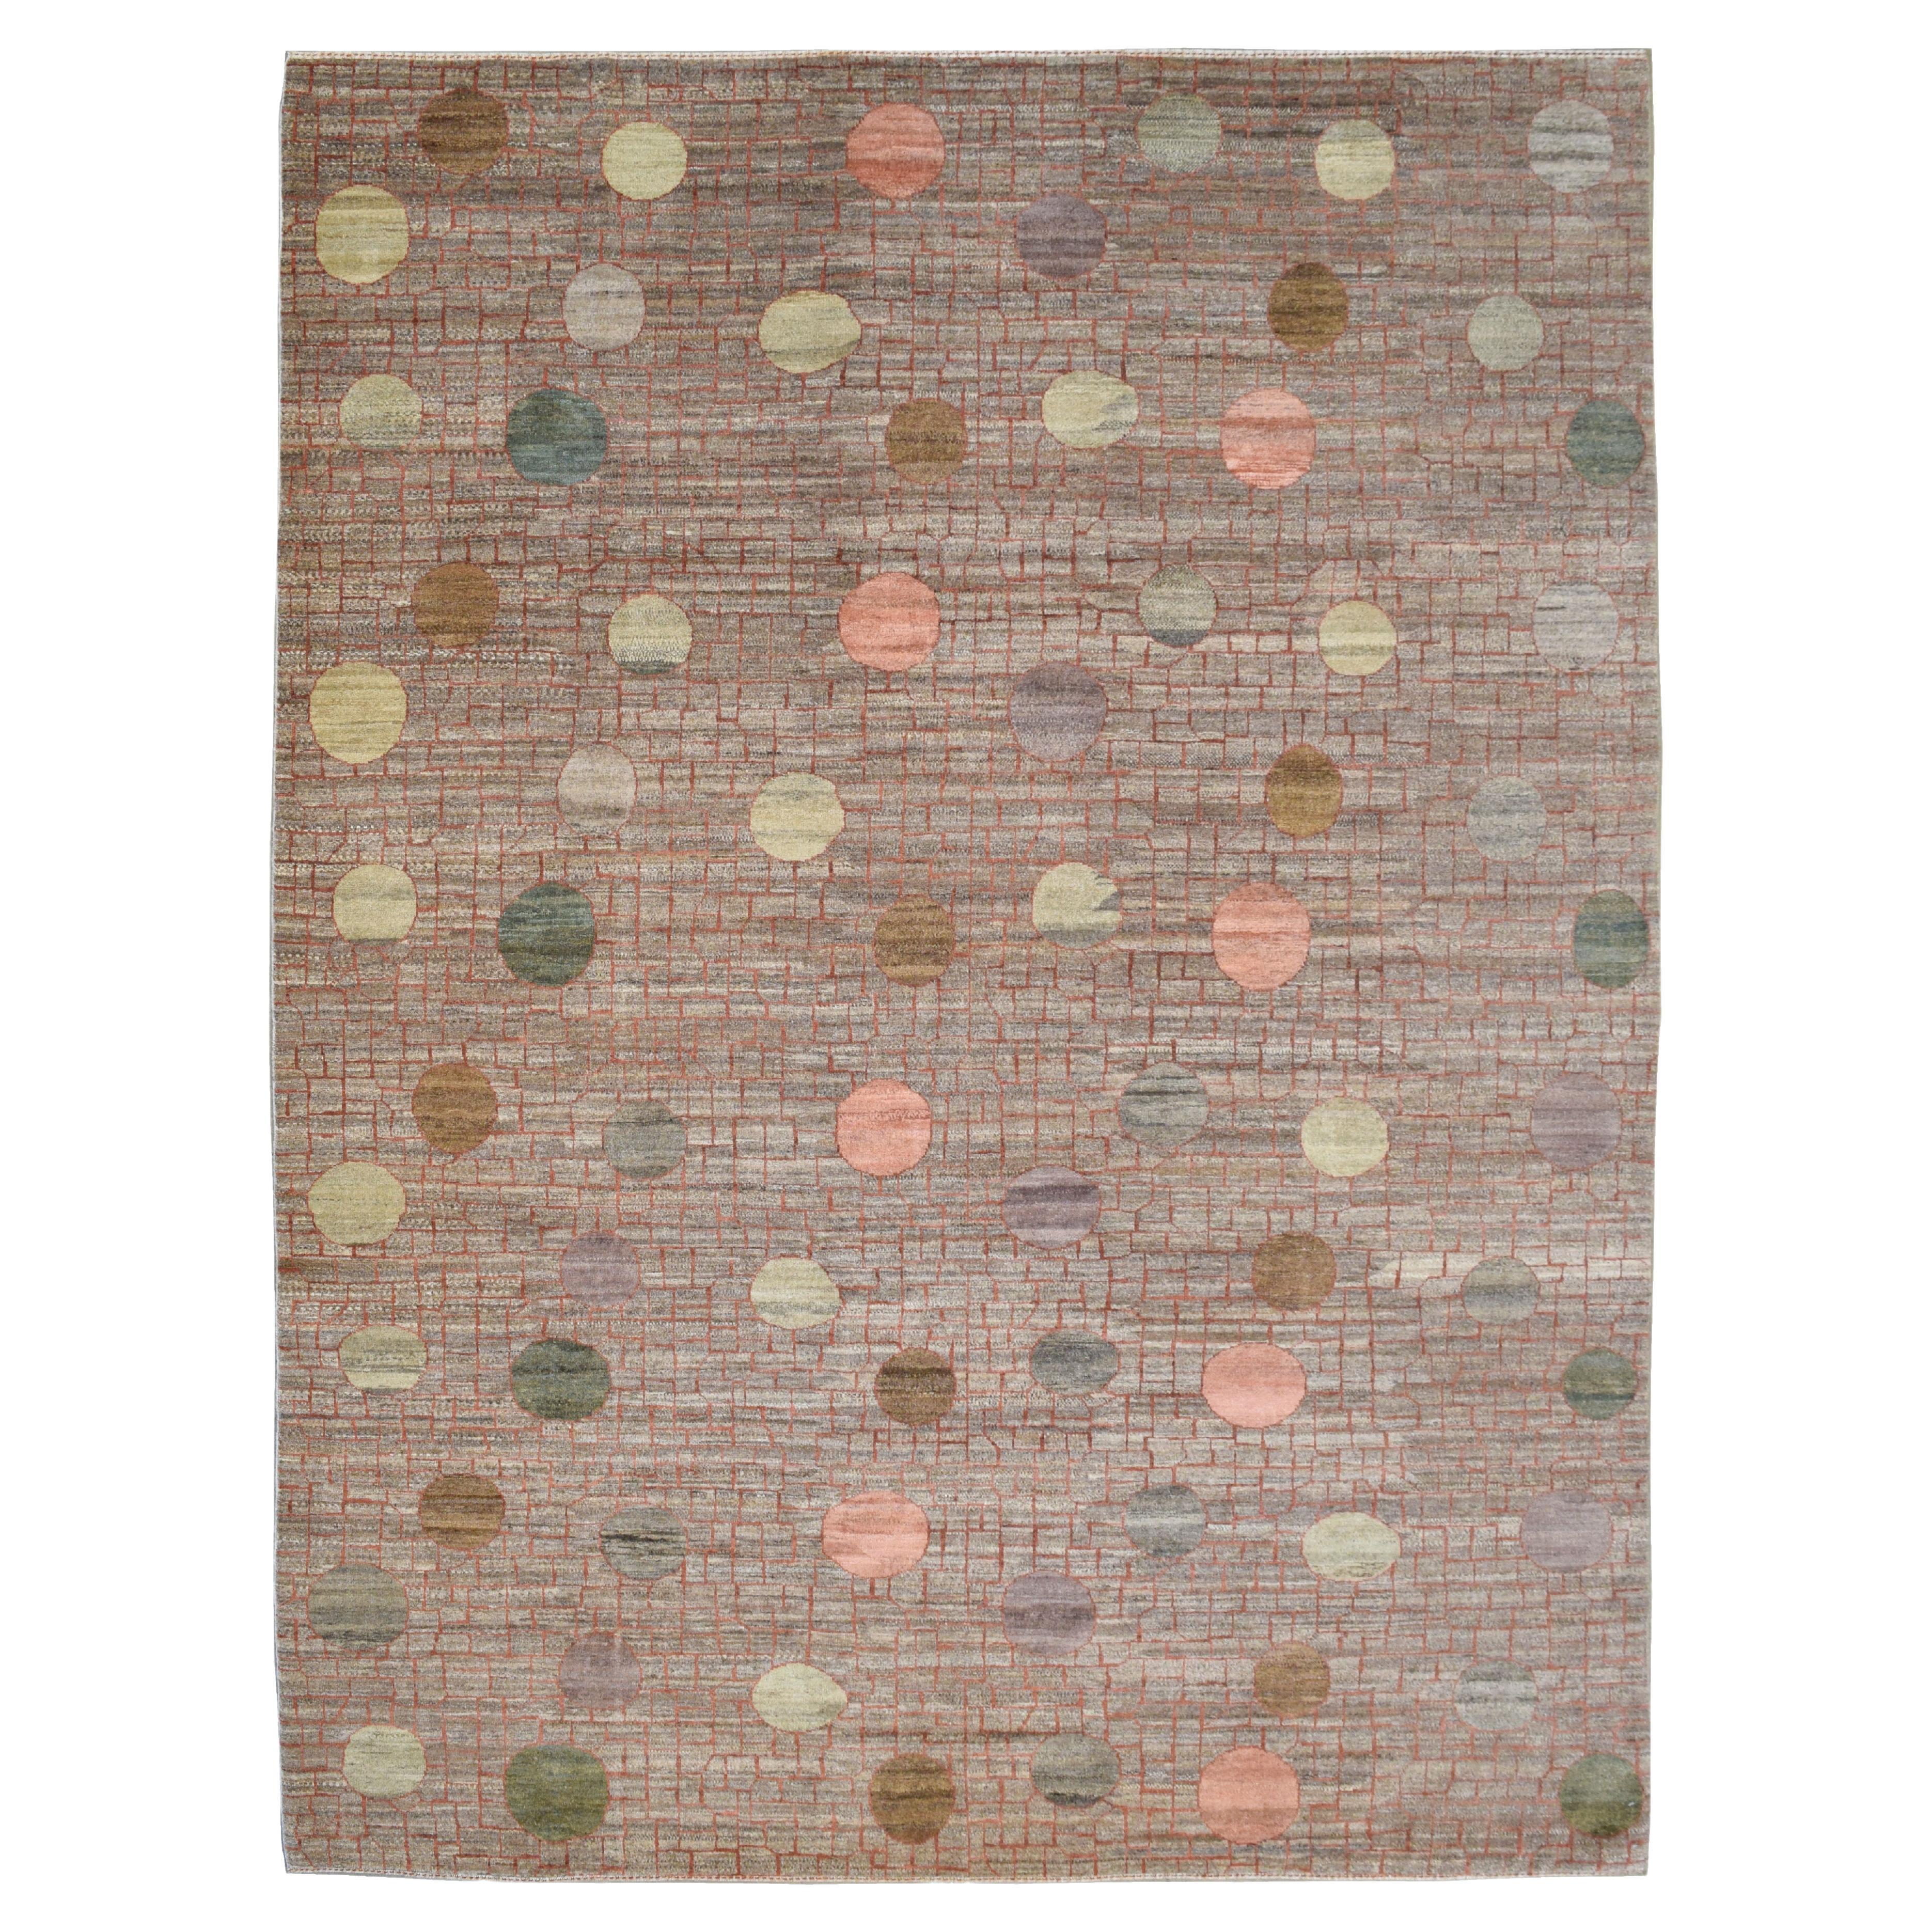 Contemporary "Full Moon" Orley Shabahang Green and Brown Persian Rug, 8' x 10' For Sale